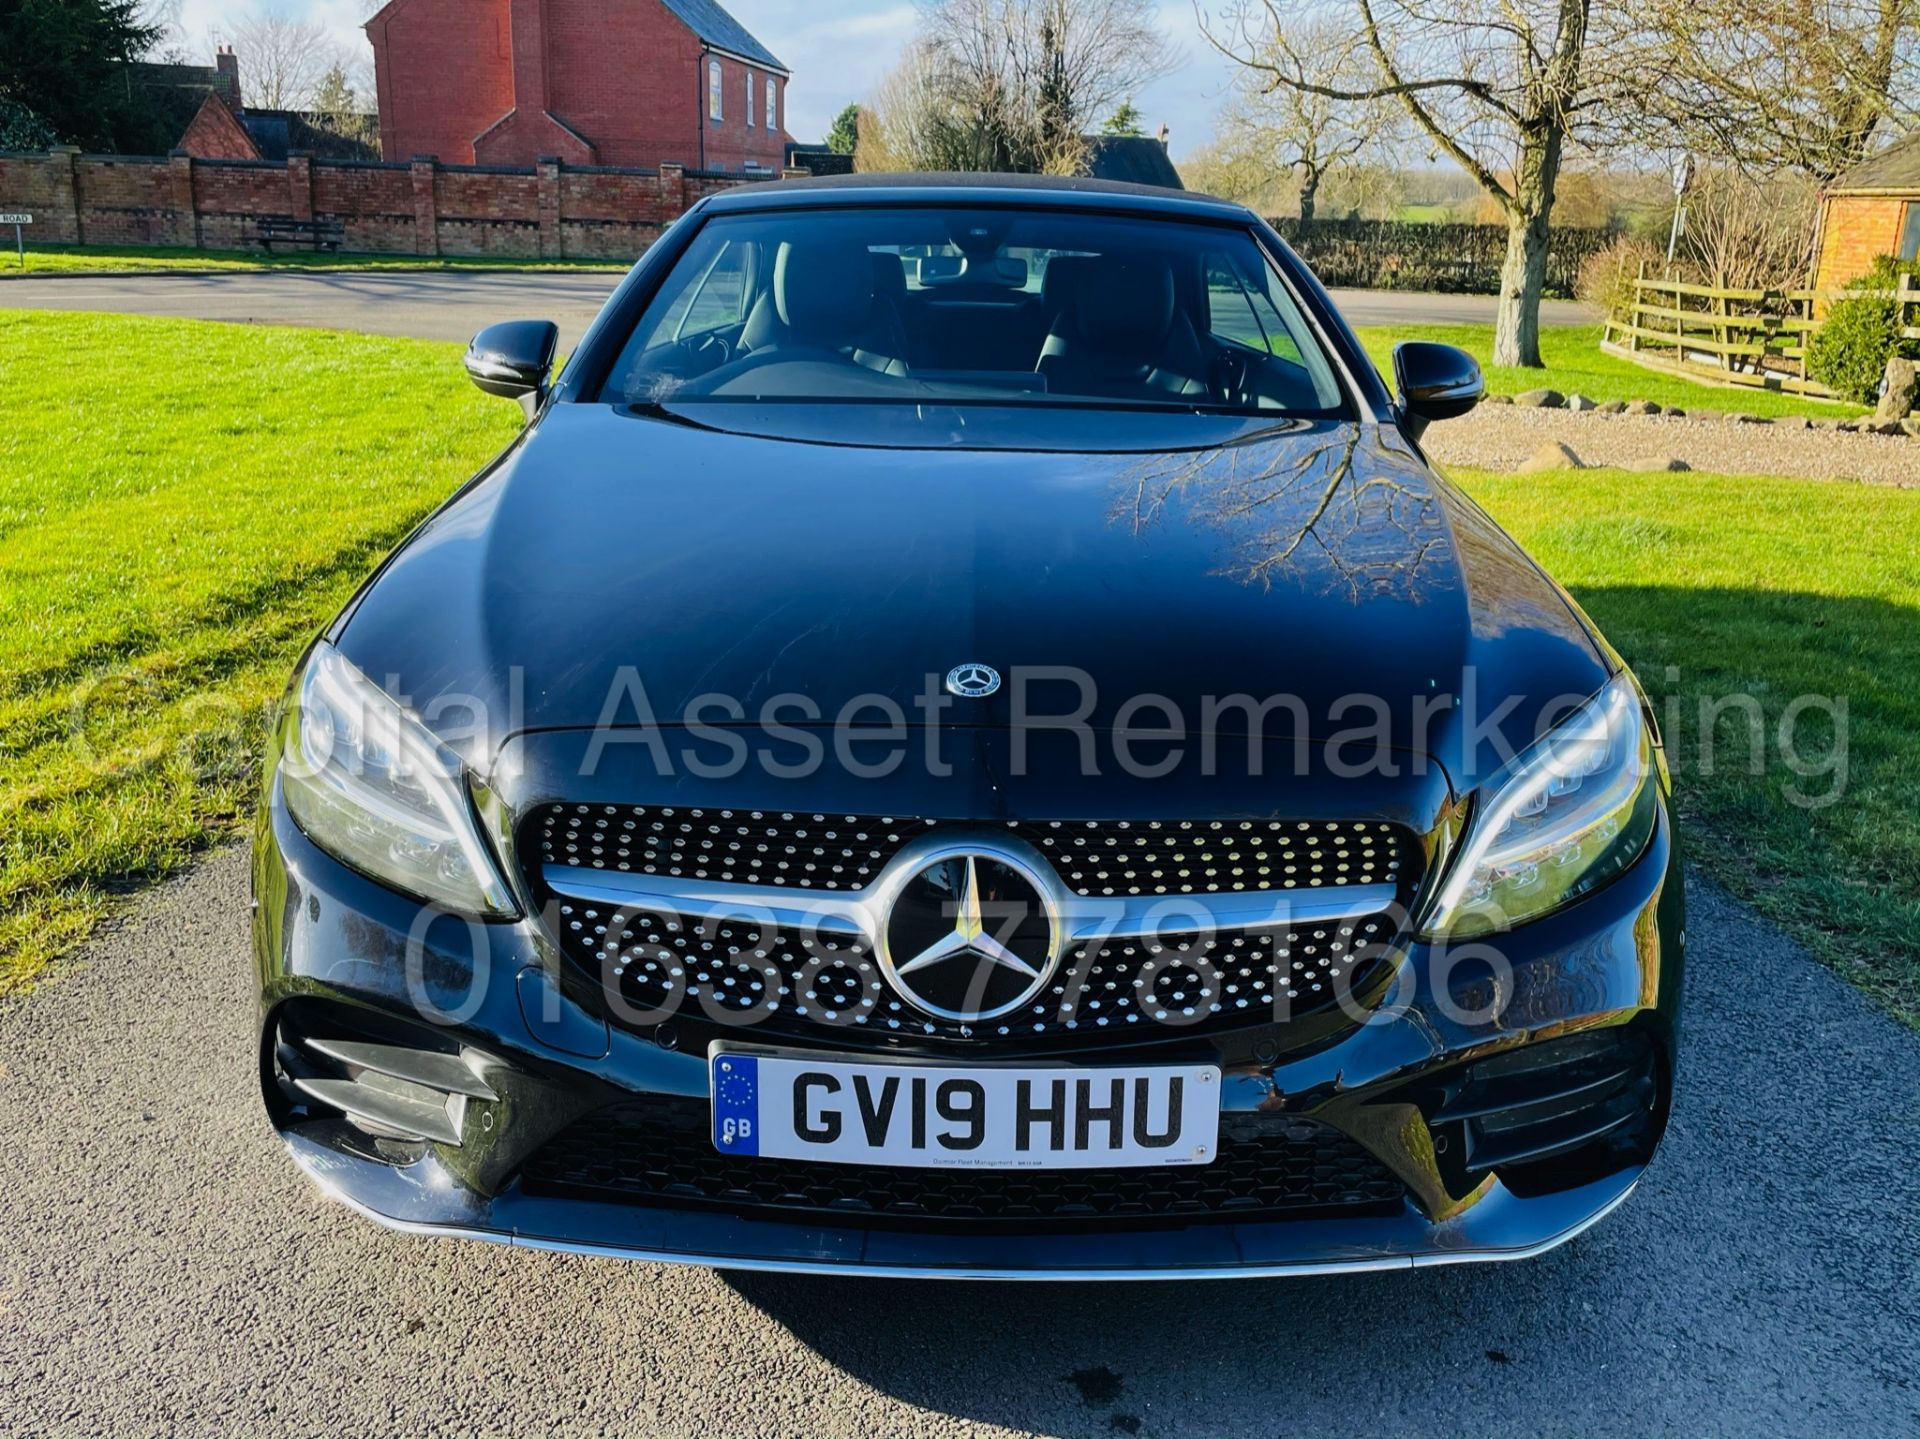 ON SALE MERCEDES-BENZ C220D *AMG LINE - CABRIOLET* (2019) '9G TRONIC AUTO - LEATHER - SAT NAV' - Image 28 of 59